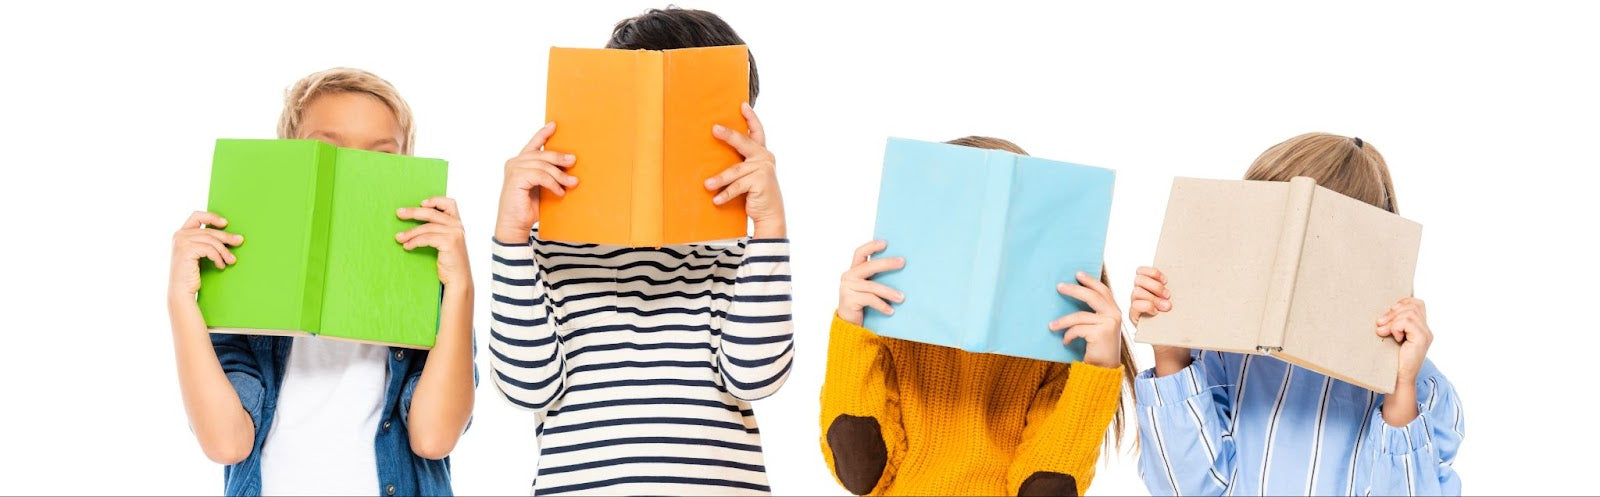 Four children peeking out from behind books, smiling